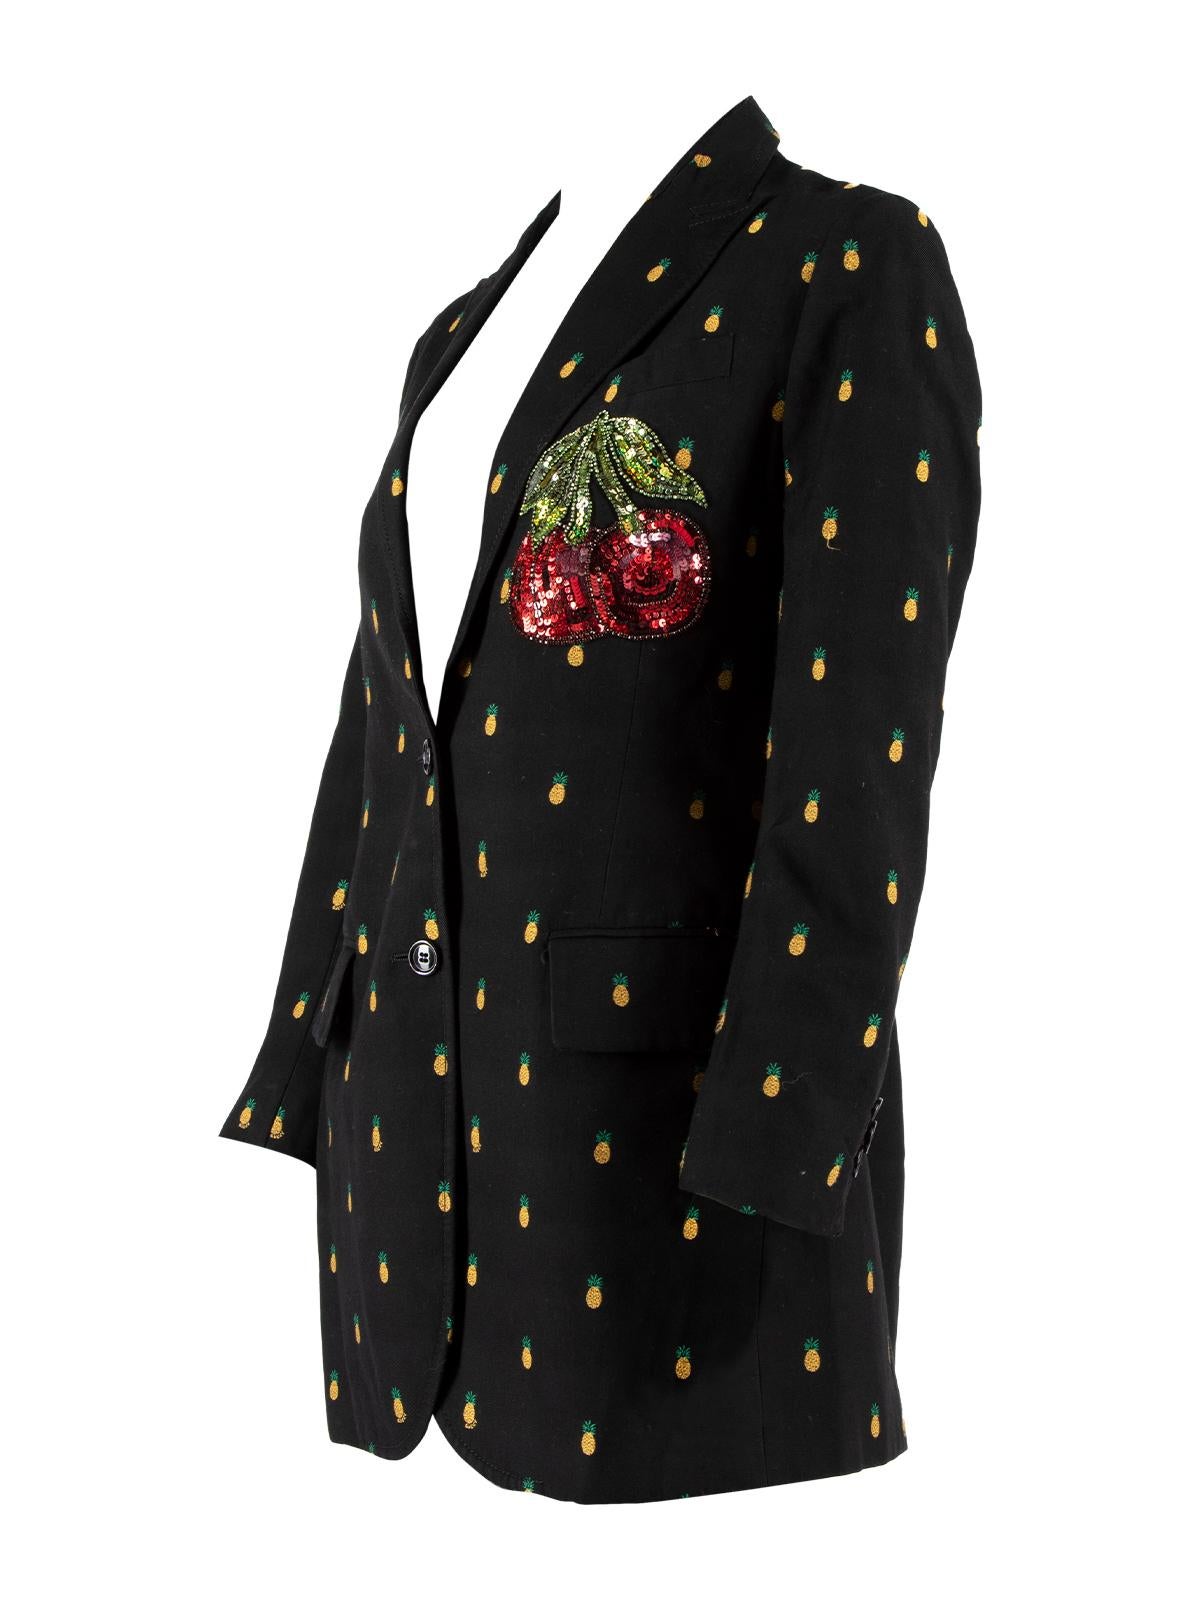 Pre-Loved Gucci Women's Pineapple Print Blazer In Excellent Condition In London, GB